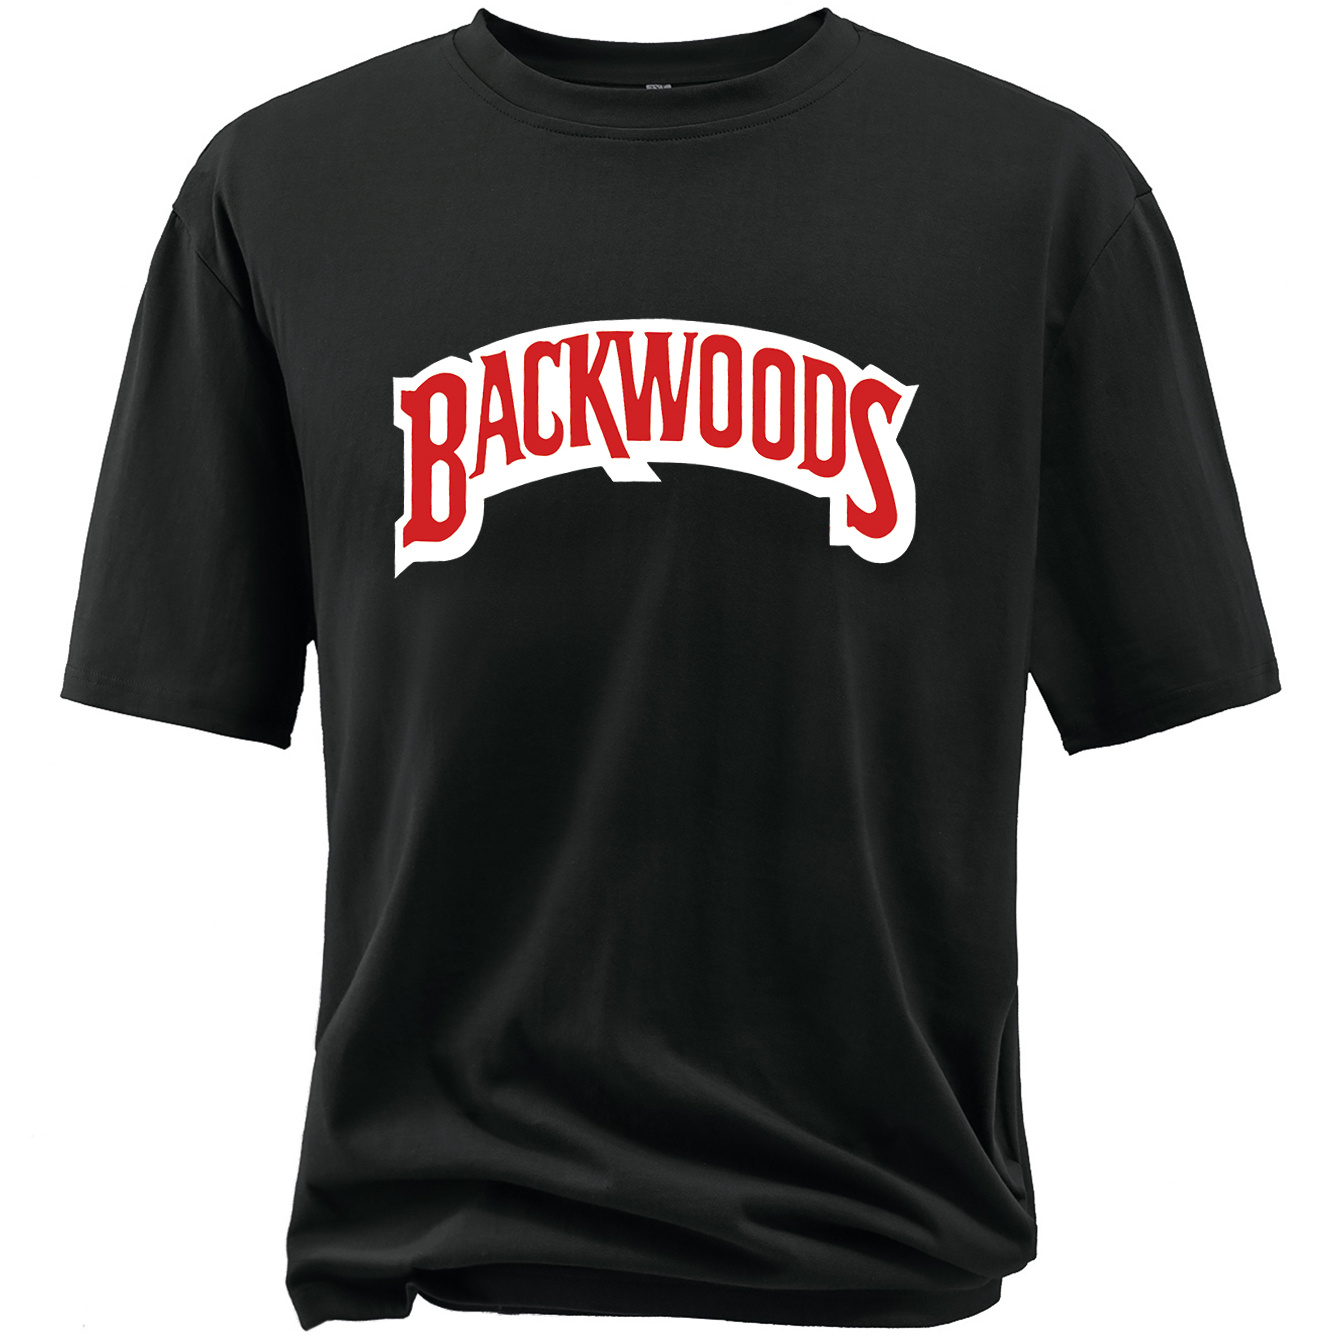 

Plus Size Men's Casual T-shirt, Backwoods Print Short Sleeve Sports Tee Tops, Summer Clothes